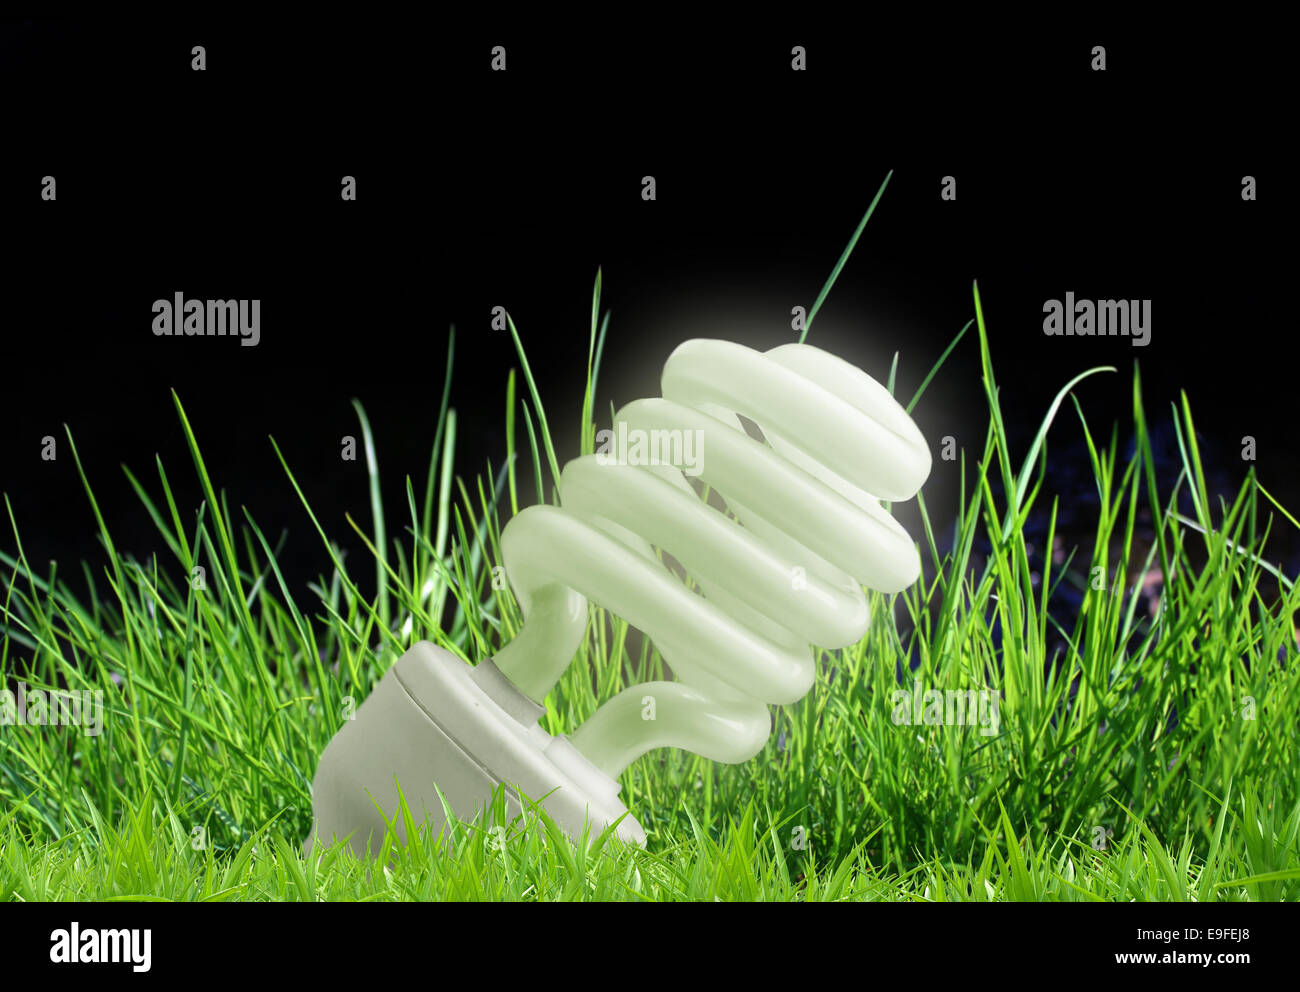 Eco-friendly light bulb lying in the grass Stock Photo